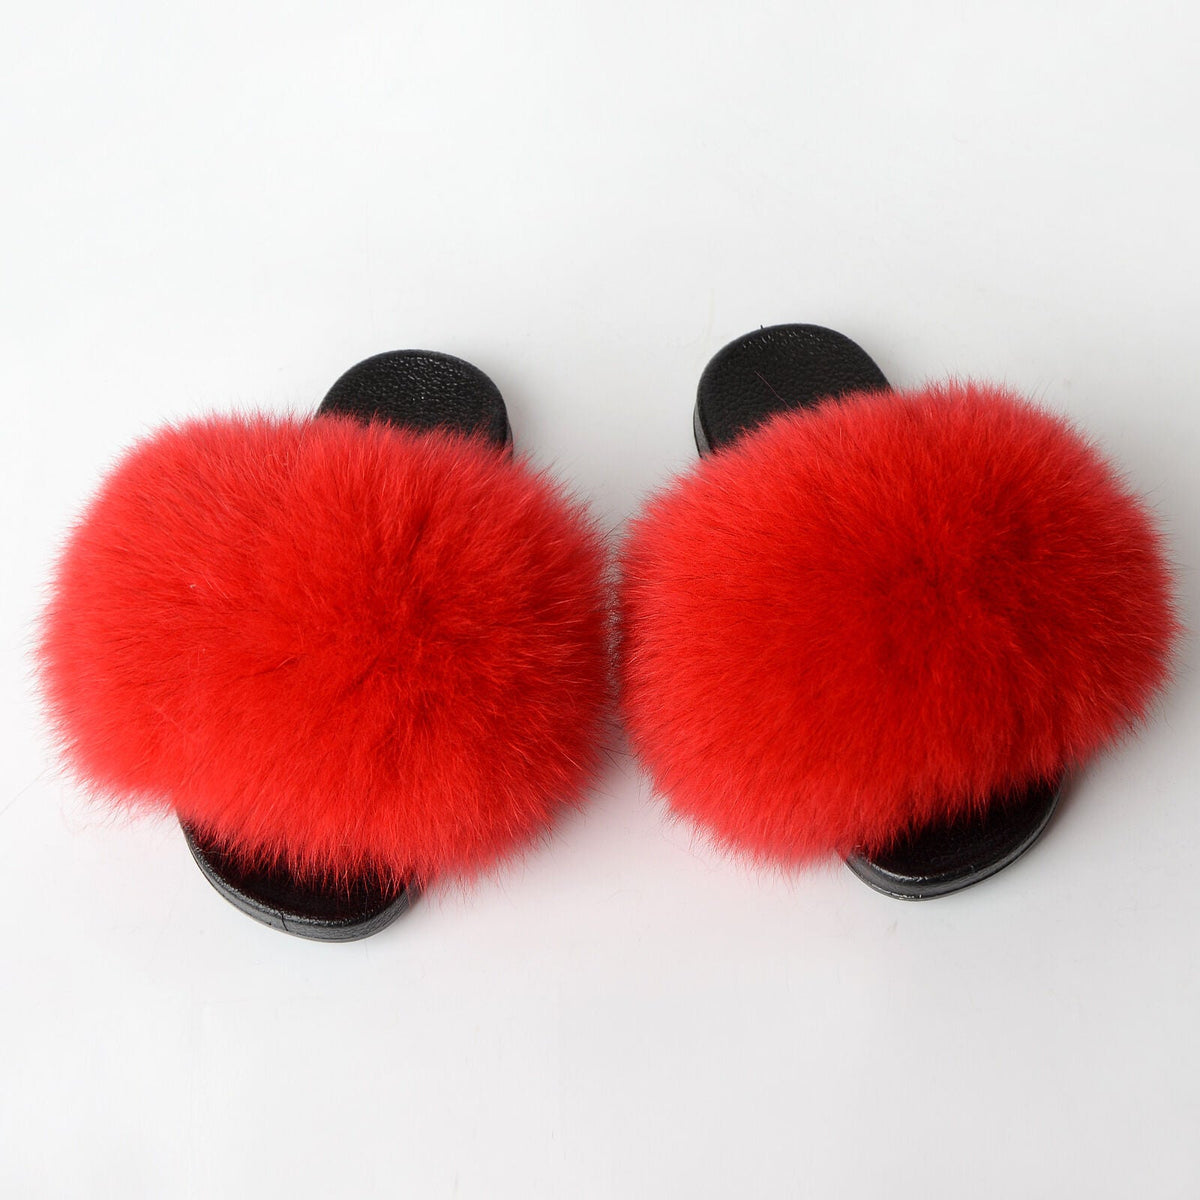 Slippers - Red fluff